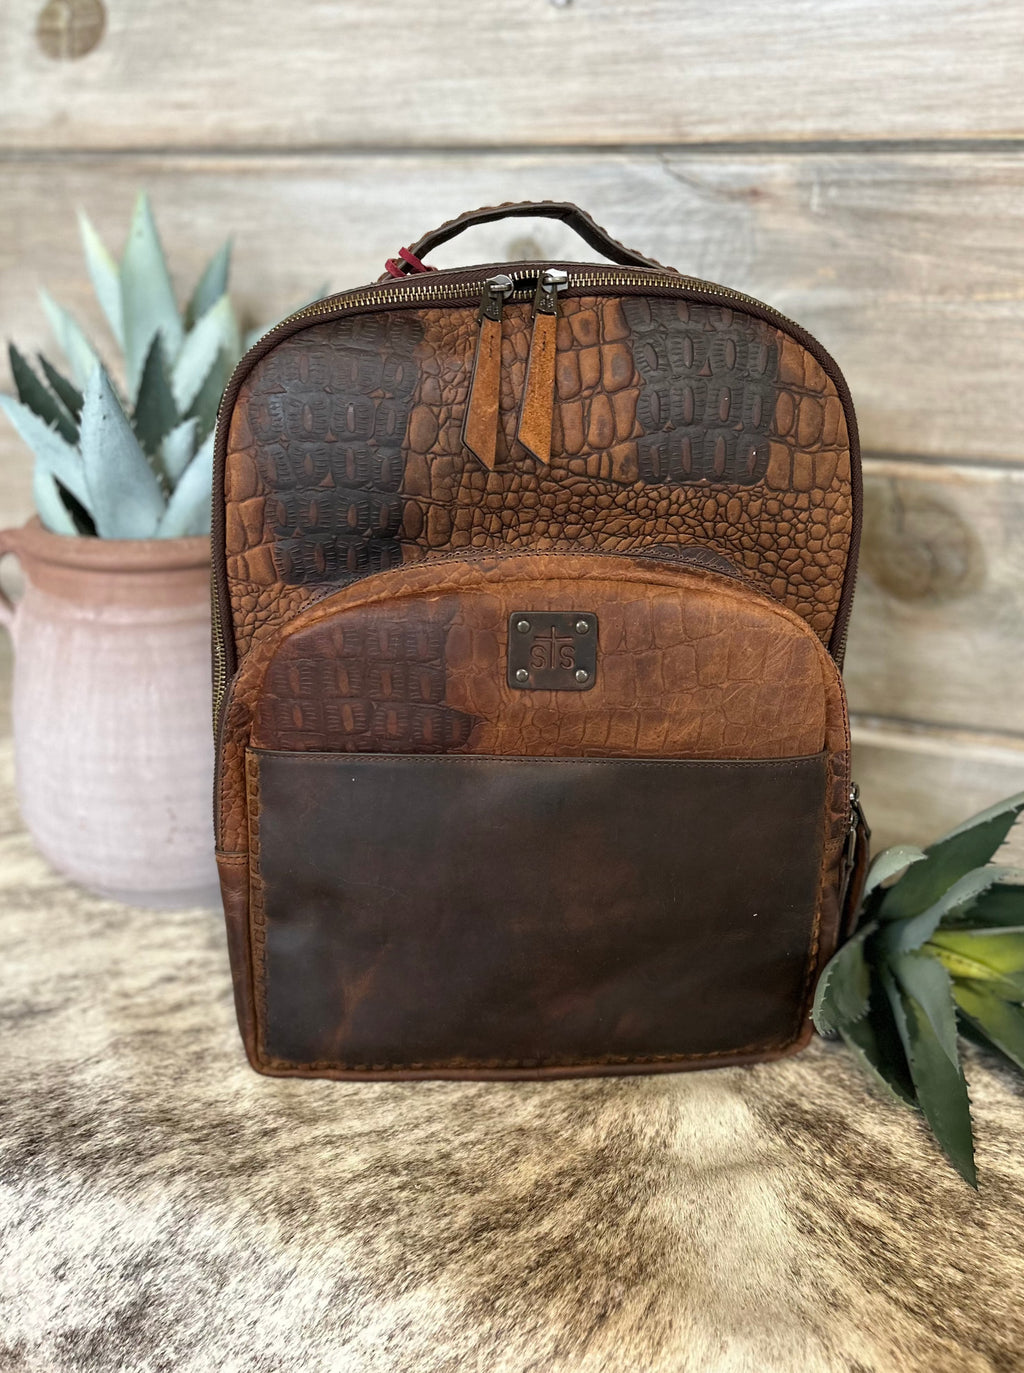 STS Catalina Croc Backpack